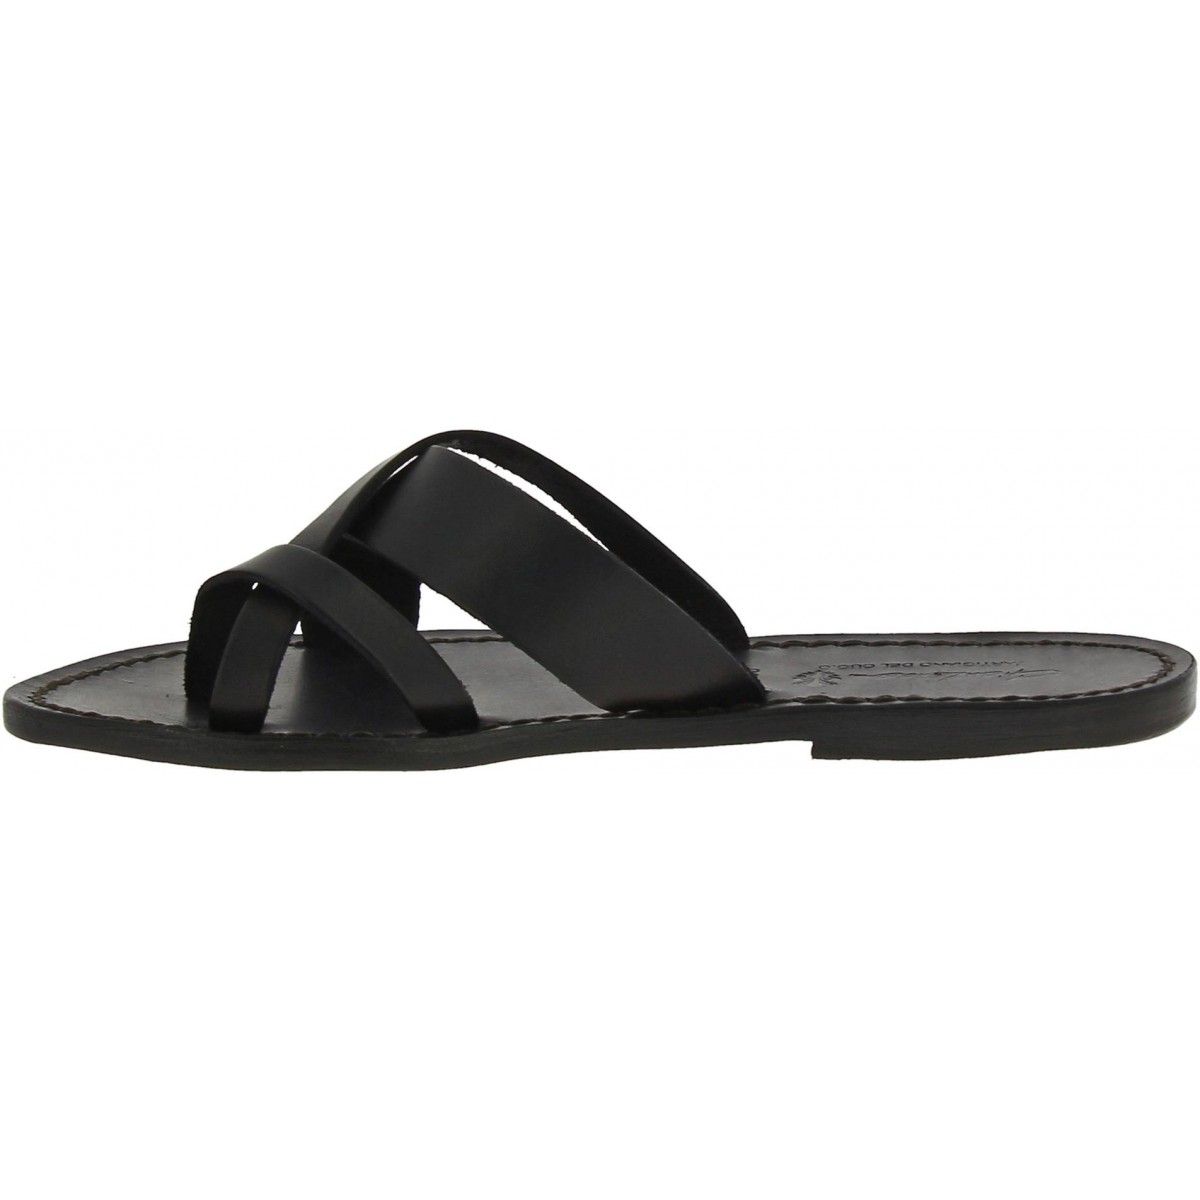 Women's thong sandals Handmade in Italy in black calf leather | The ...